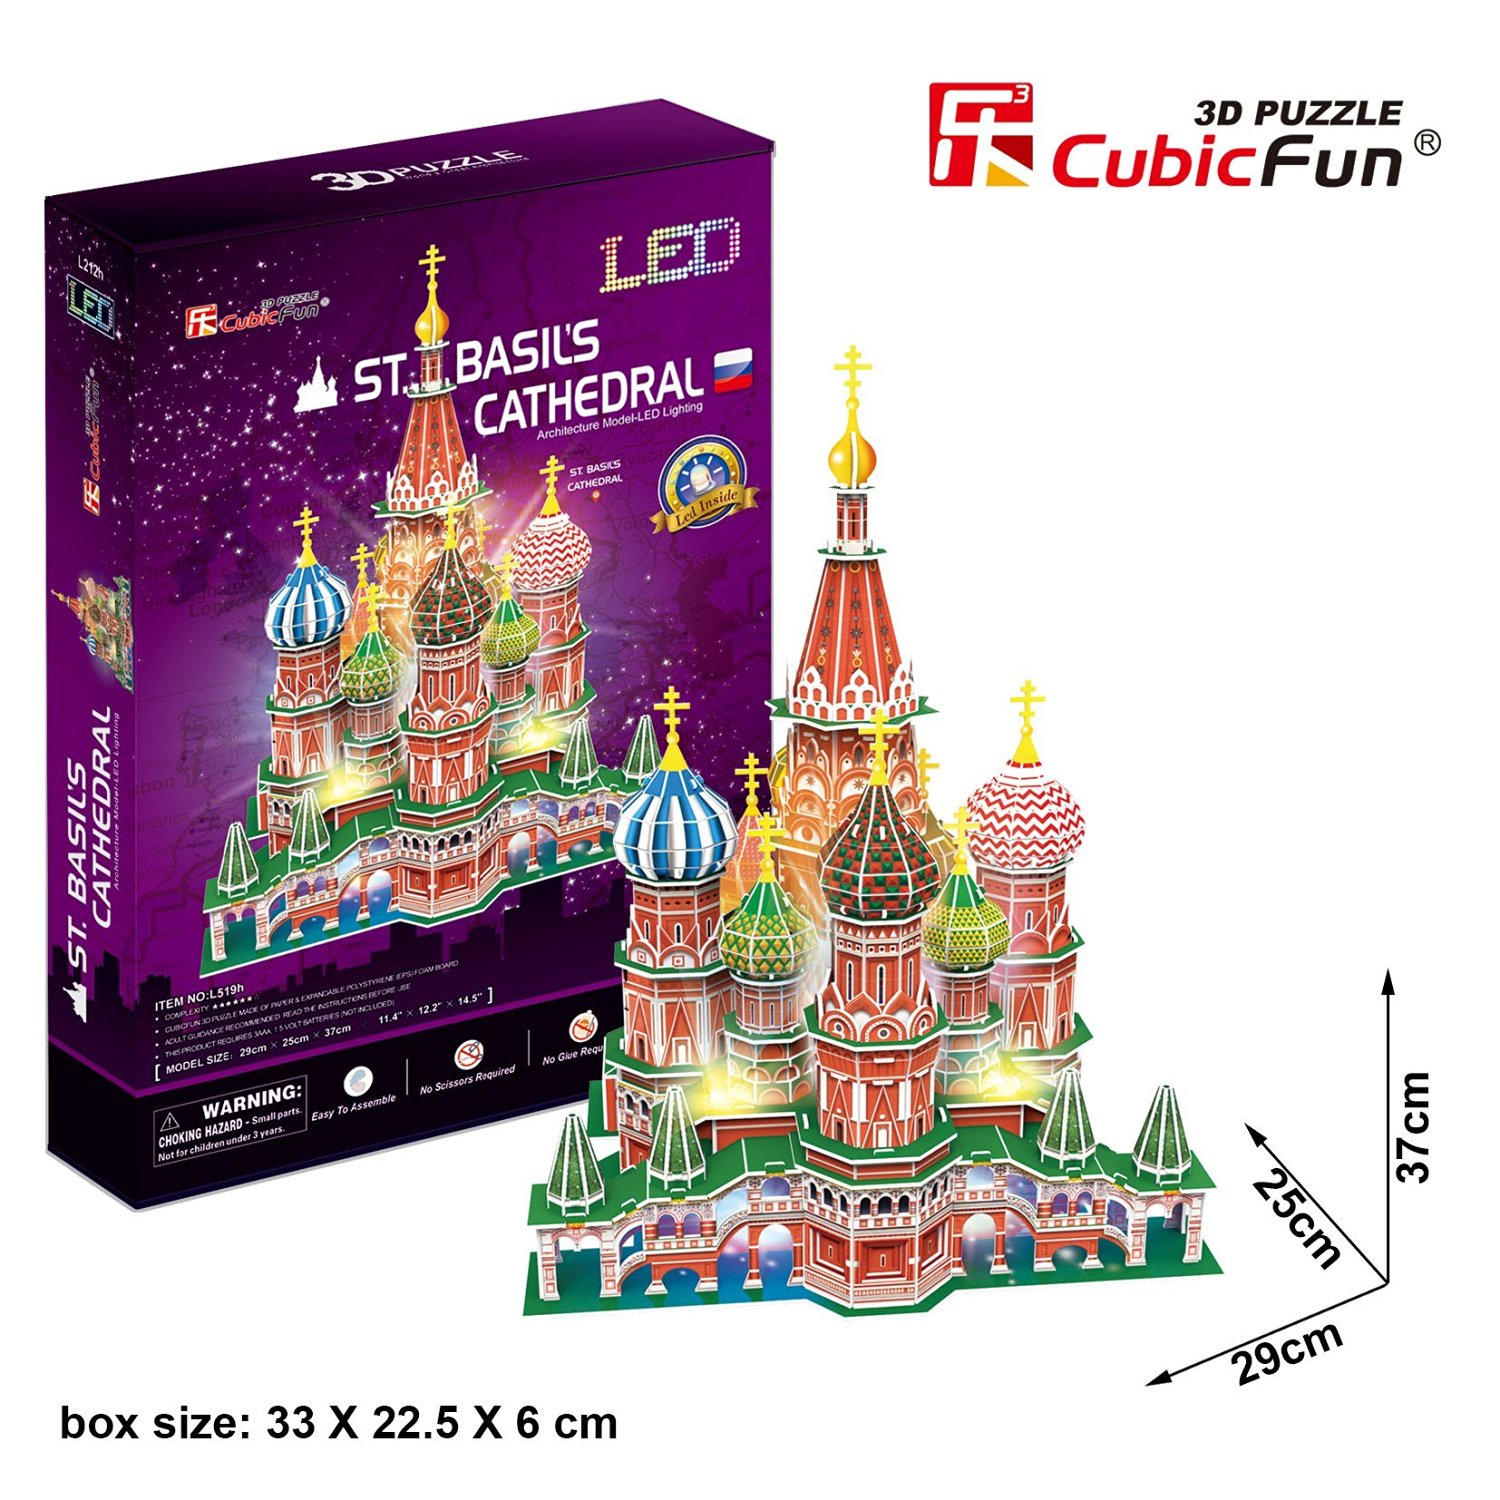  3D Jigsaw Puzzle with LED - St. Basil's Cathedral - Difficulty 6/8 224 piece jigsaw puzzle